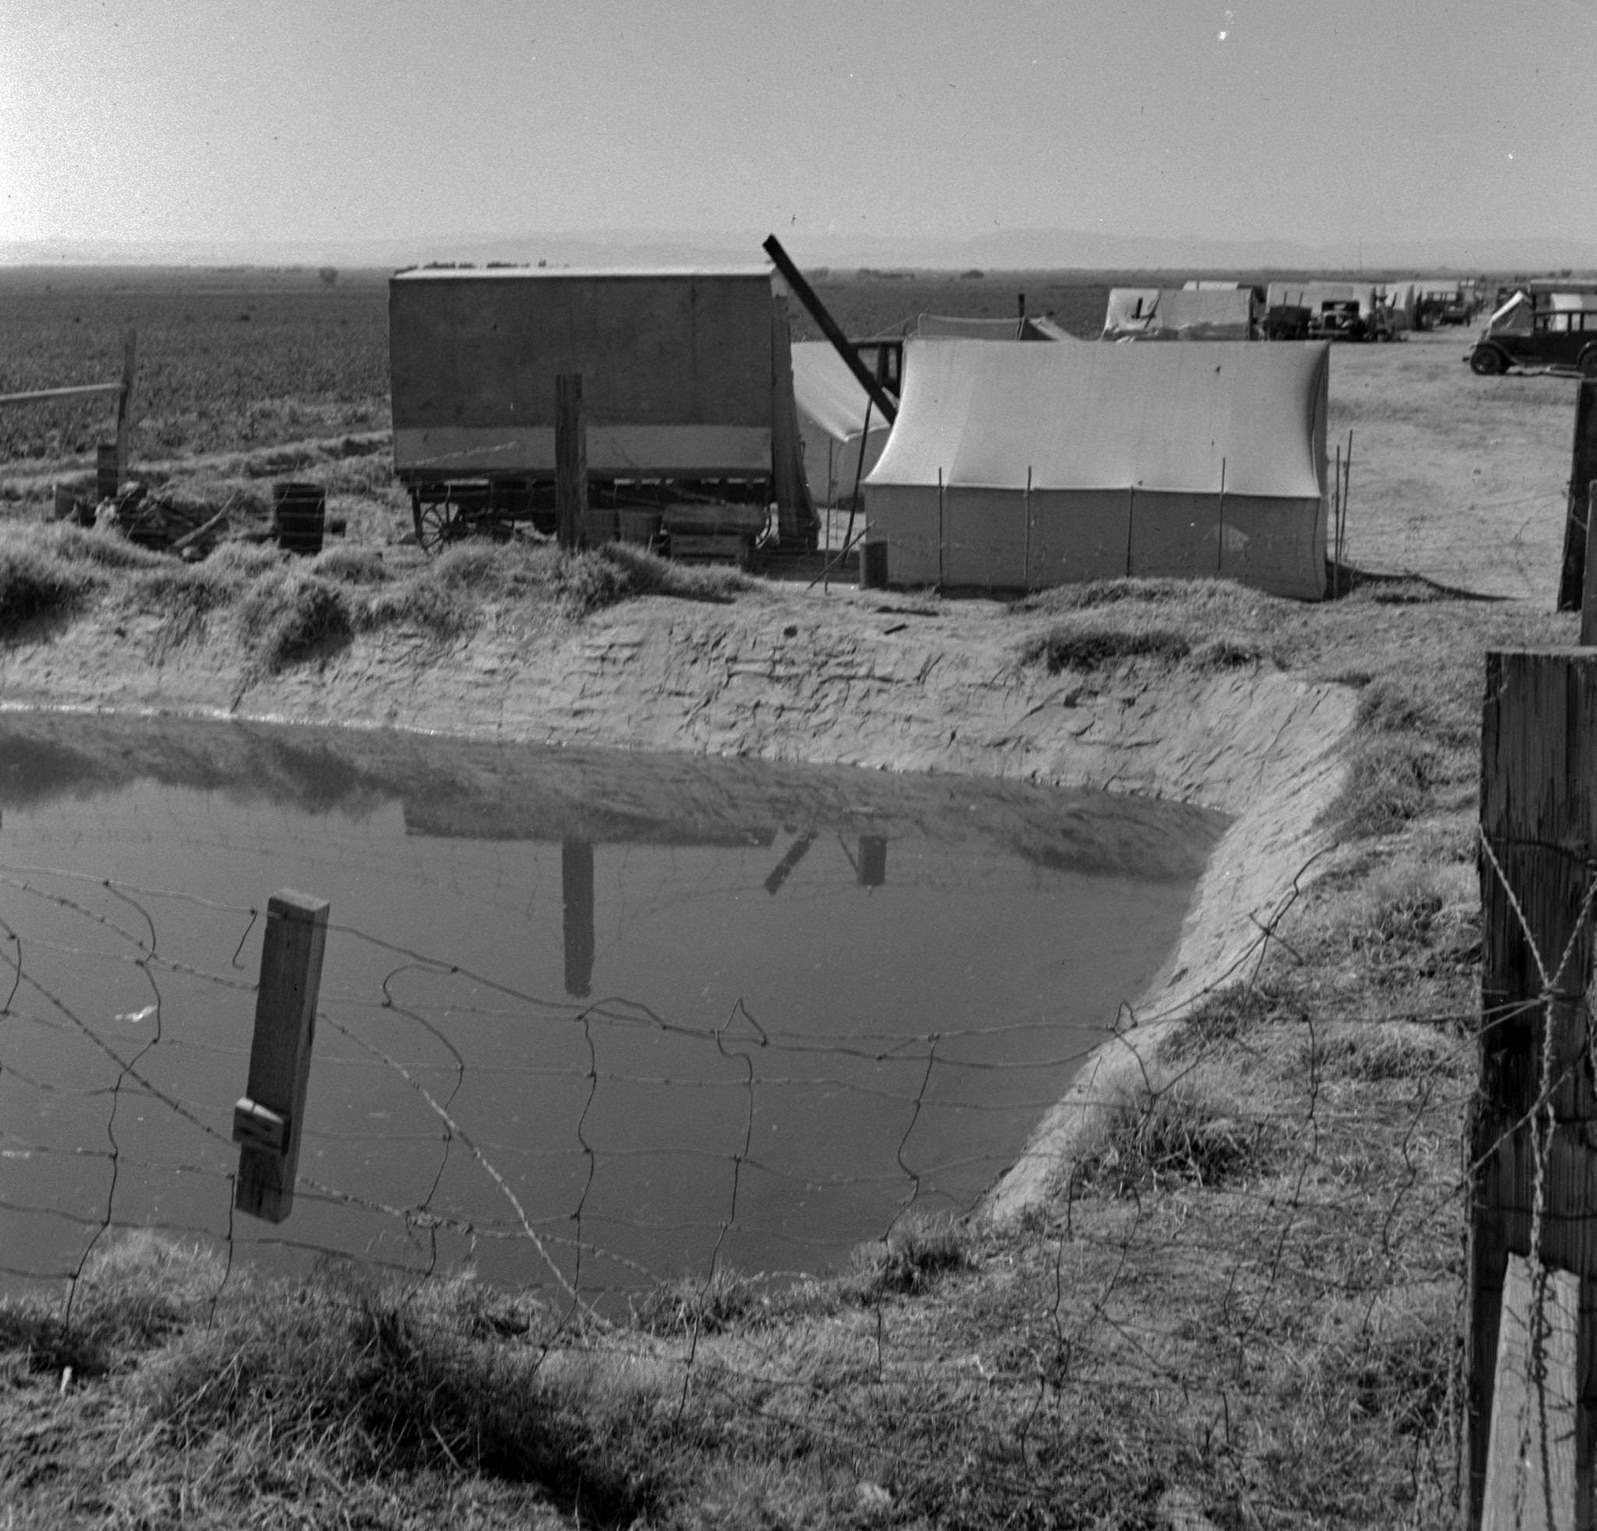 Ditch bank camp for migrant agricultural workers, 1937